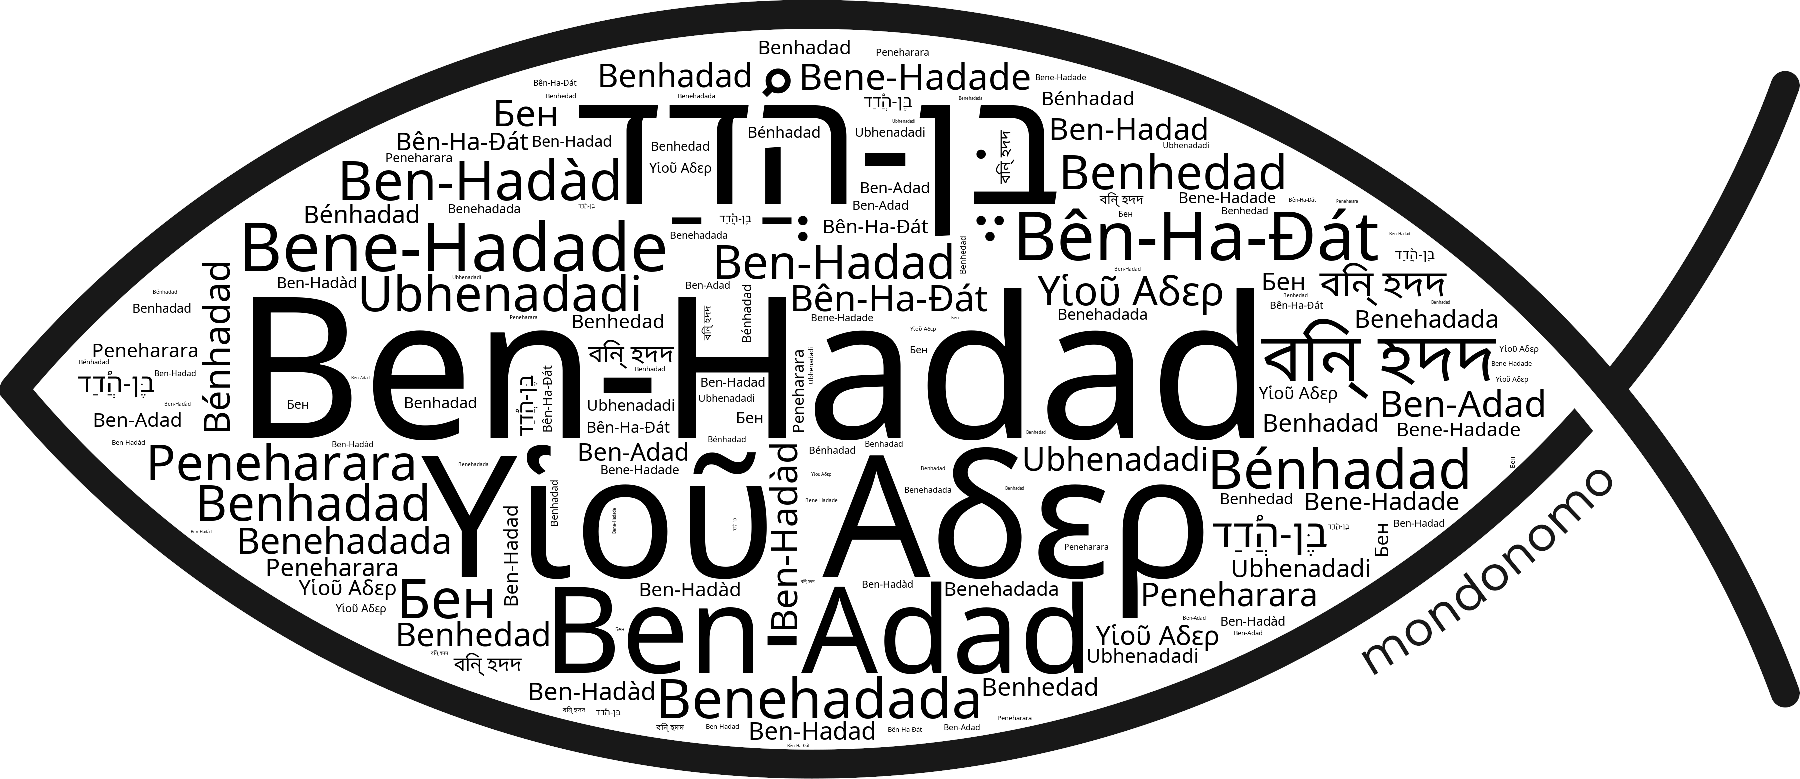 Name Ben-Hadad in the world's Bibles